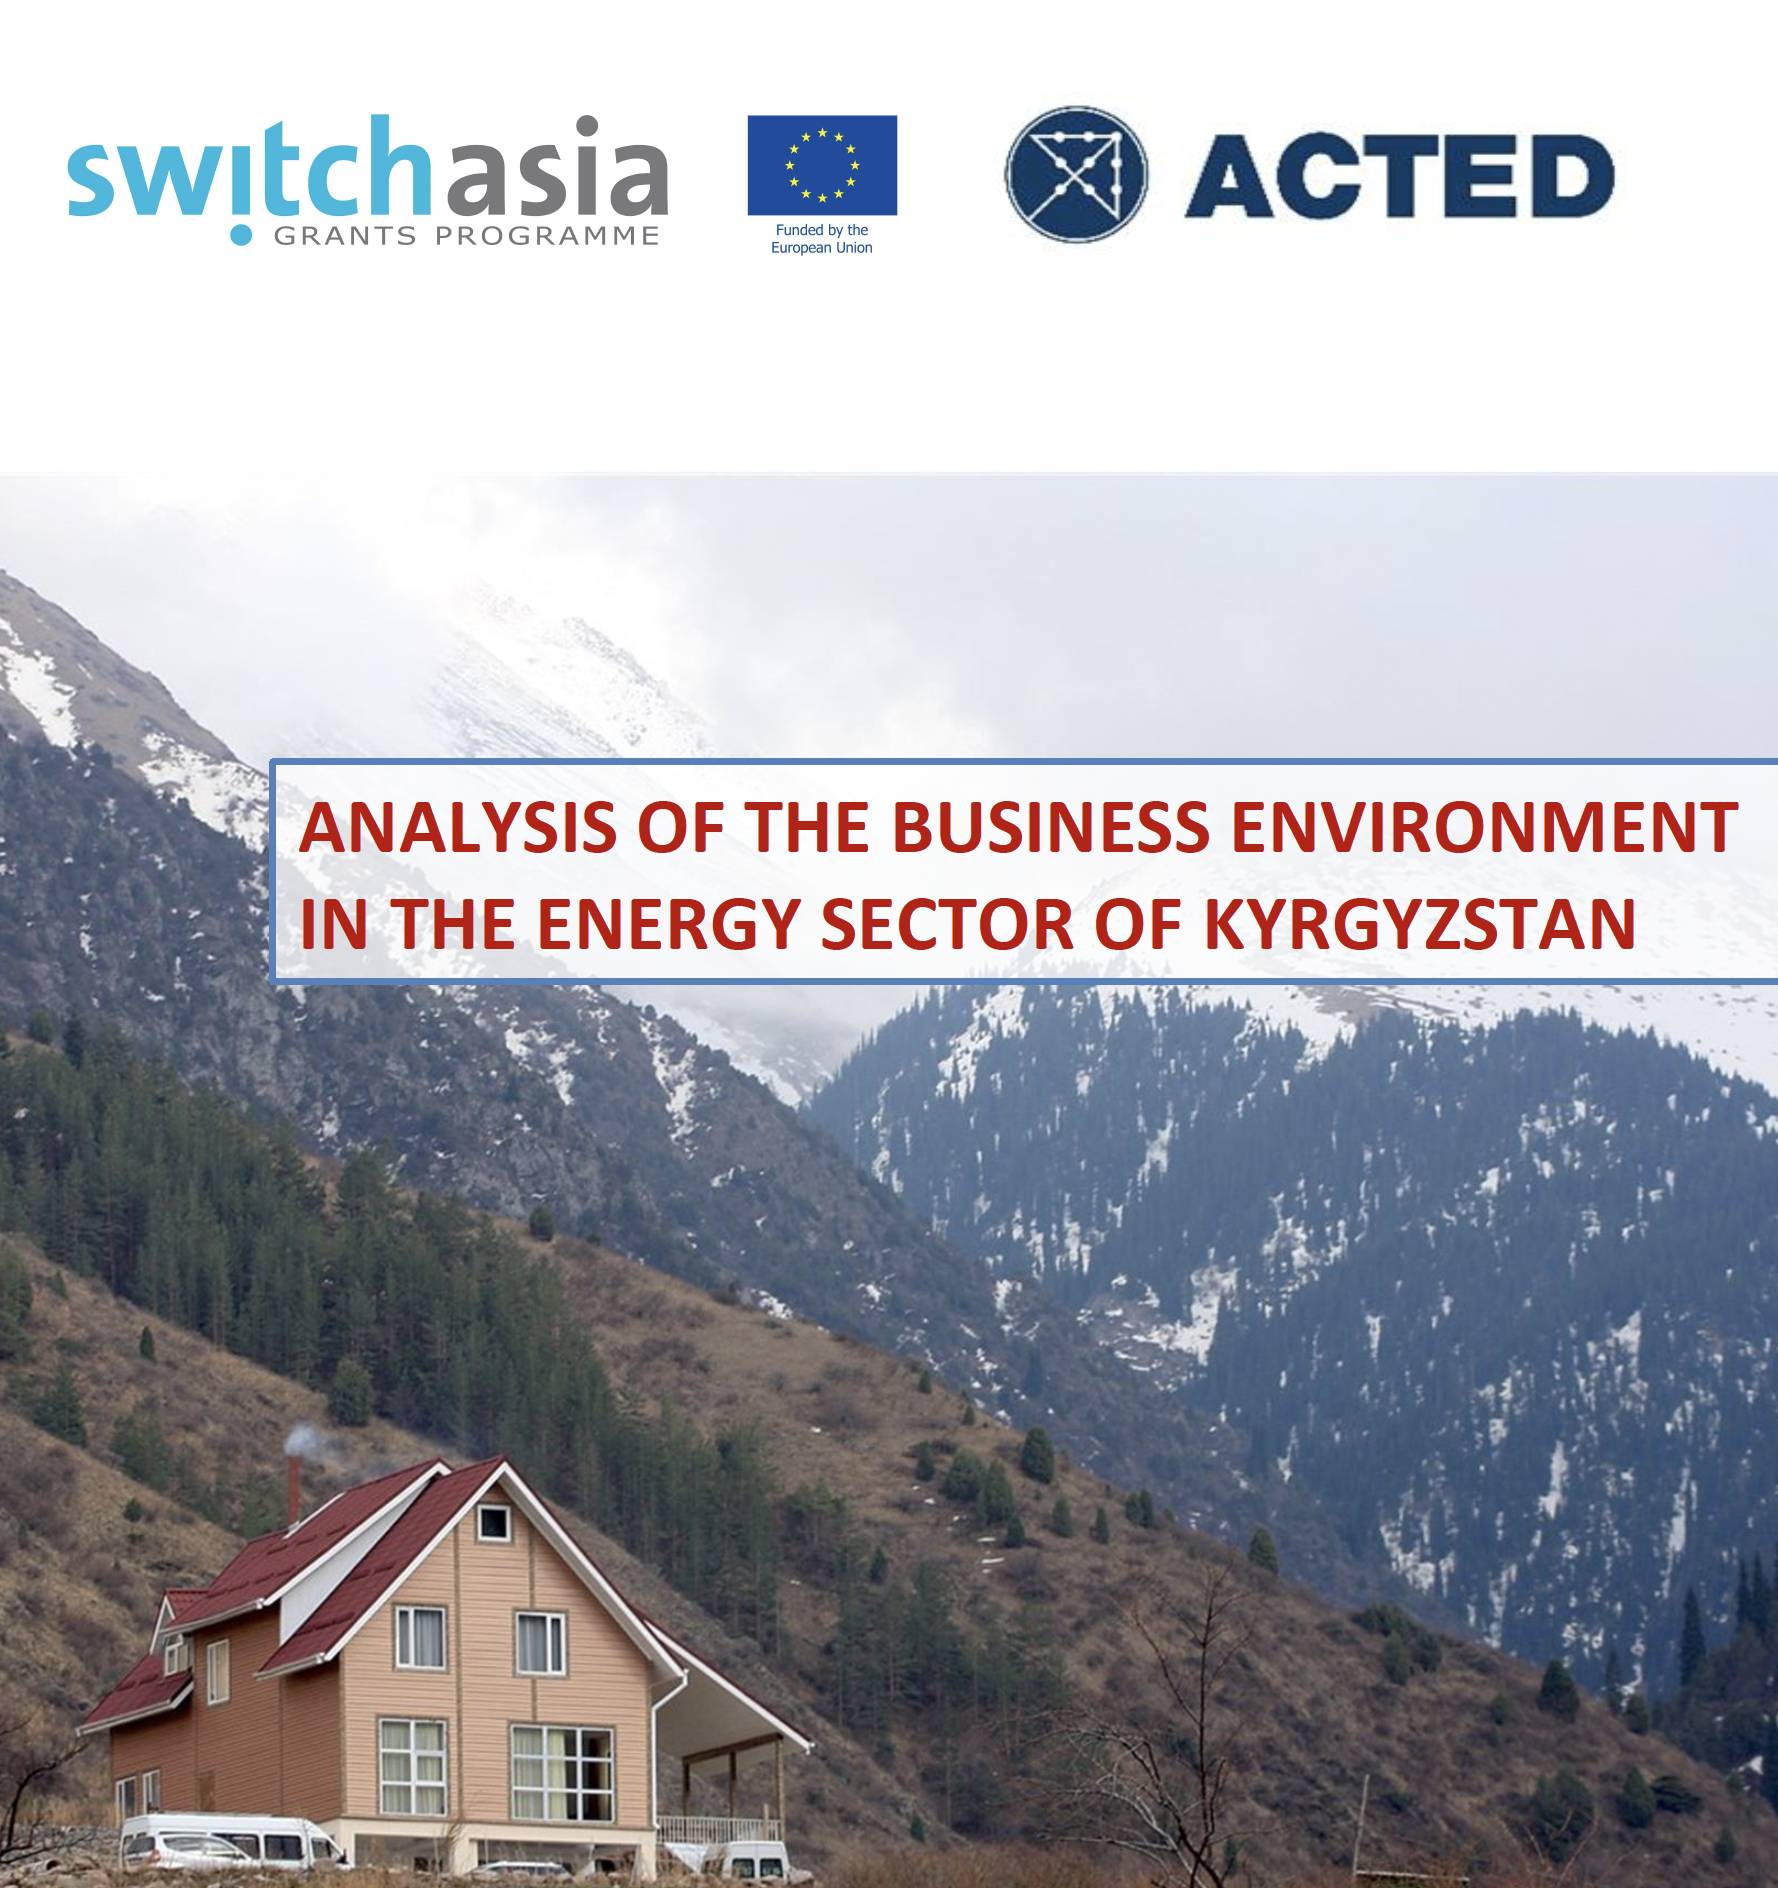 Analysis of the business environment in the energy sector of Kyrgyzstan